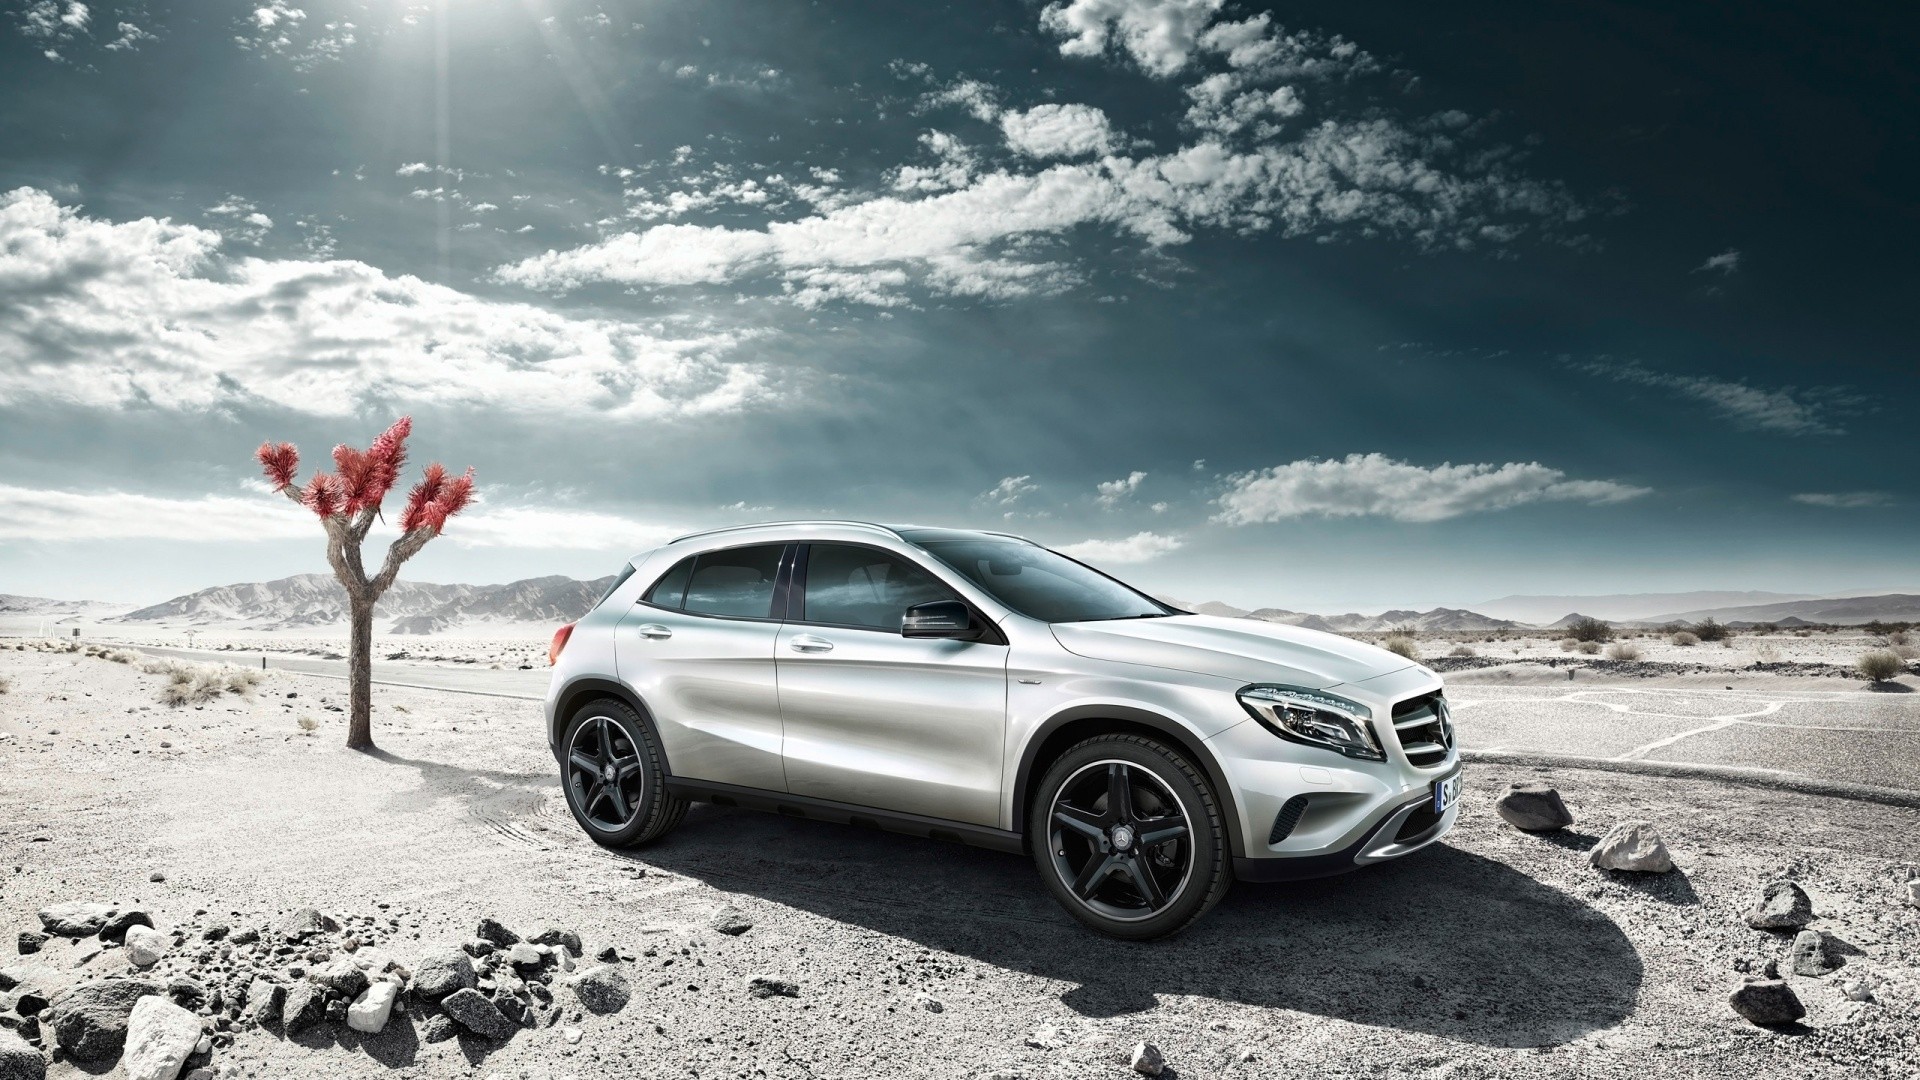 Sky And Silver Mercedes Benz Gla Amg Wallpaper Stream